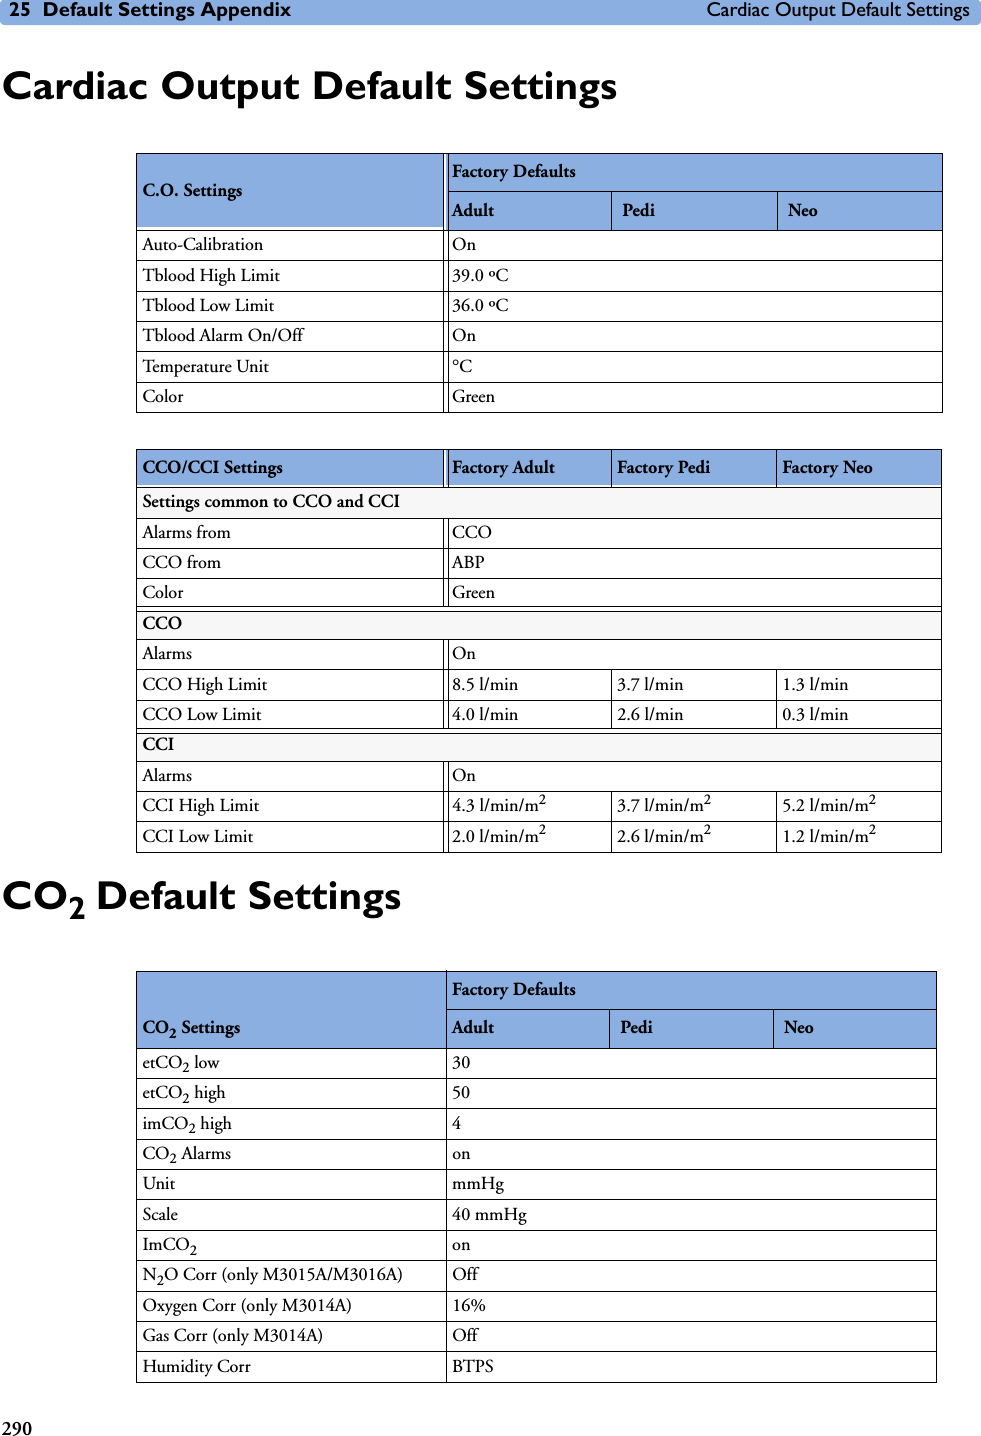 25 Default Settings Appendix Cardiac Output Default Settings290Cardiac Output Default SettingsCO2 Default SettingsC.O. SettingsFactory DefaultsAdult  Pedi  NeoAuto-Calibration OnTblood High Limit 39.0 ºCTblood Low Limit 36.0 ºCTblood Alarm On/Off OnTemperature Unit qCColor GreenCCO/CCI Settings Factory Adult Factory Pedi Factory NeoSettings common to CCO and CCIAlarms from CCOCCO from ABPColor GreenCCOAlarms OnCCO High Limit 8.5 l/min 3.7 l/min 1.3 l/minCCO Low Limit 4.0 l/min 2.6 l/min 0.3 l/minCCIAlarms   OnCCI High Limit 4.3 l/min/m23.7 l/min/m25.2 l/min/m2CCI Low Limit 2.0 l/min/m22.6 l/min/m21.2 l/min/m2CO2 SettingsFactory Defaults Adult  Pedi  NeoetCO2 low 30etCO2 high  50imCO2 high  4CO2 Alarms  onUnit mmHgScale 40 mmHgImCO2onN2O Corr (only M3015A/M3016A) OffOxygen Corr (only M3014A) 16%Gas Corr (only M3014A) OffHumidity Corr BTPS